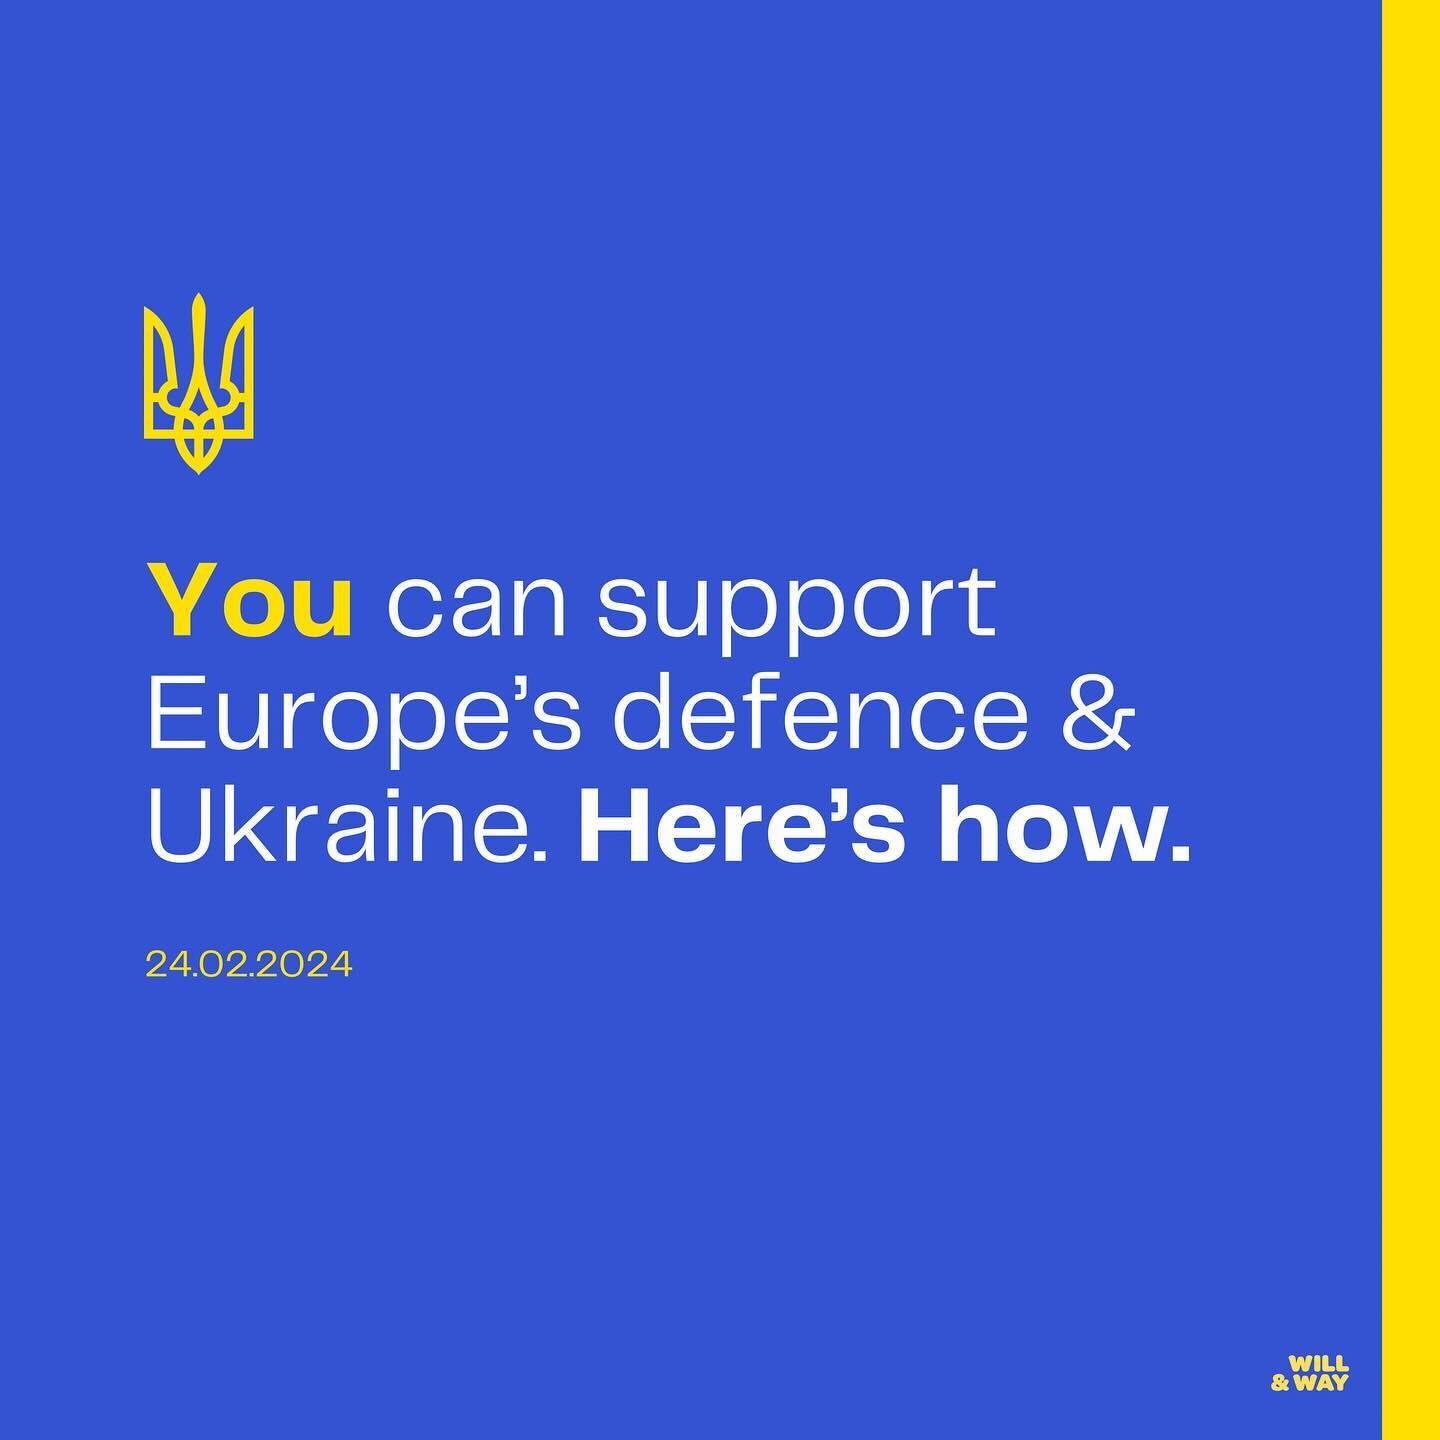 24.02.2024: 2 years of full-scale invasion out of russia&rsquo;s 10-year war. Anyone can aid Europe&rsquo;s defence via Ukraine. Here&rsquo;s what you can do:

Symbols &amp; Language
1. Recognise 🇺🇦 symbols: tryzub, 🌻, resilience
2. Know what z, r